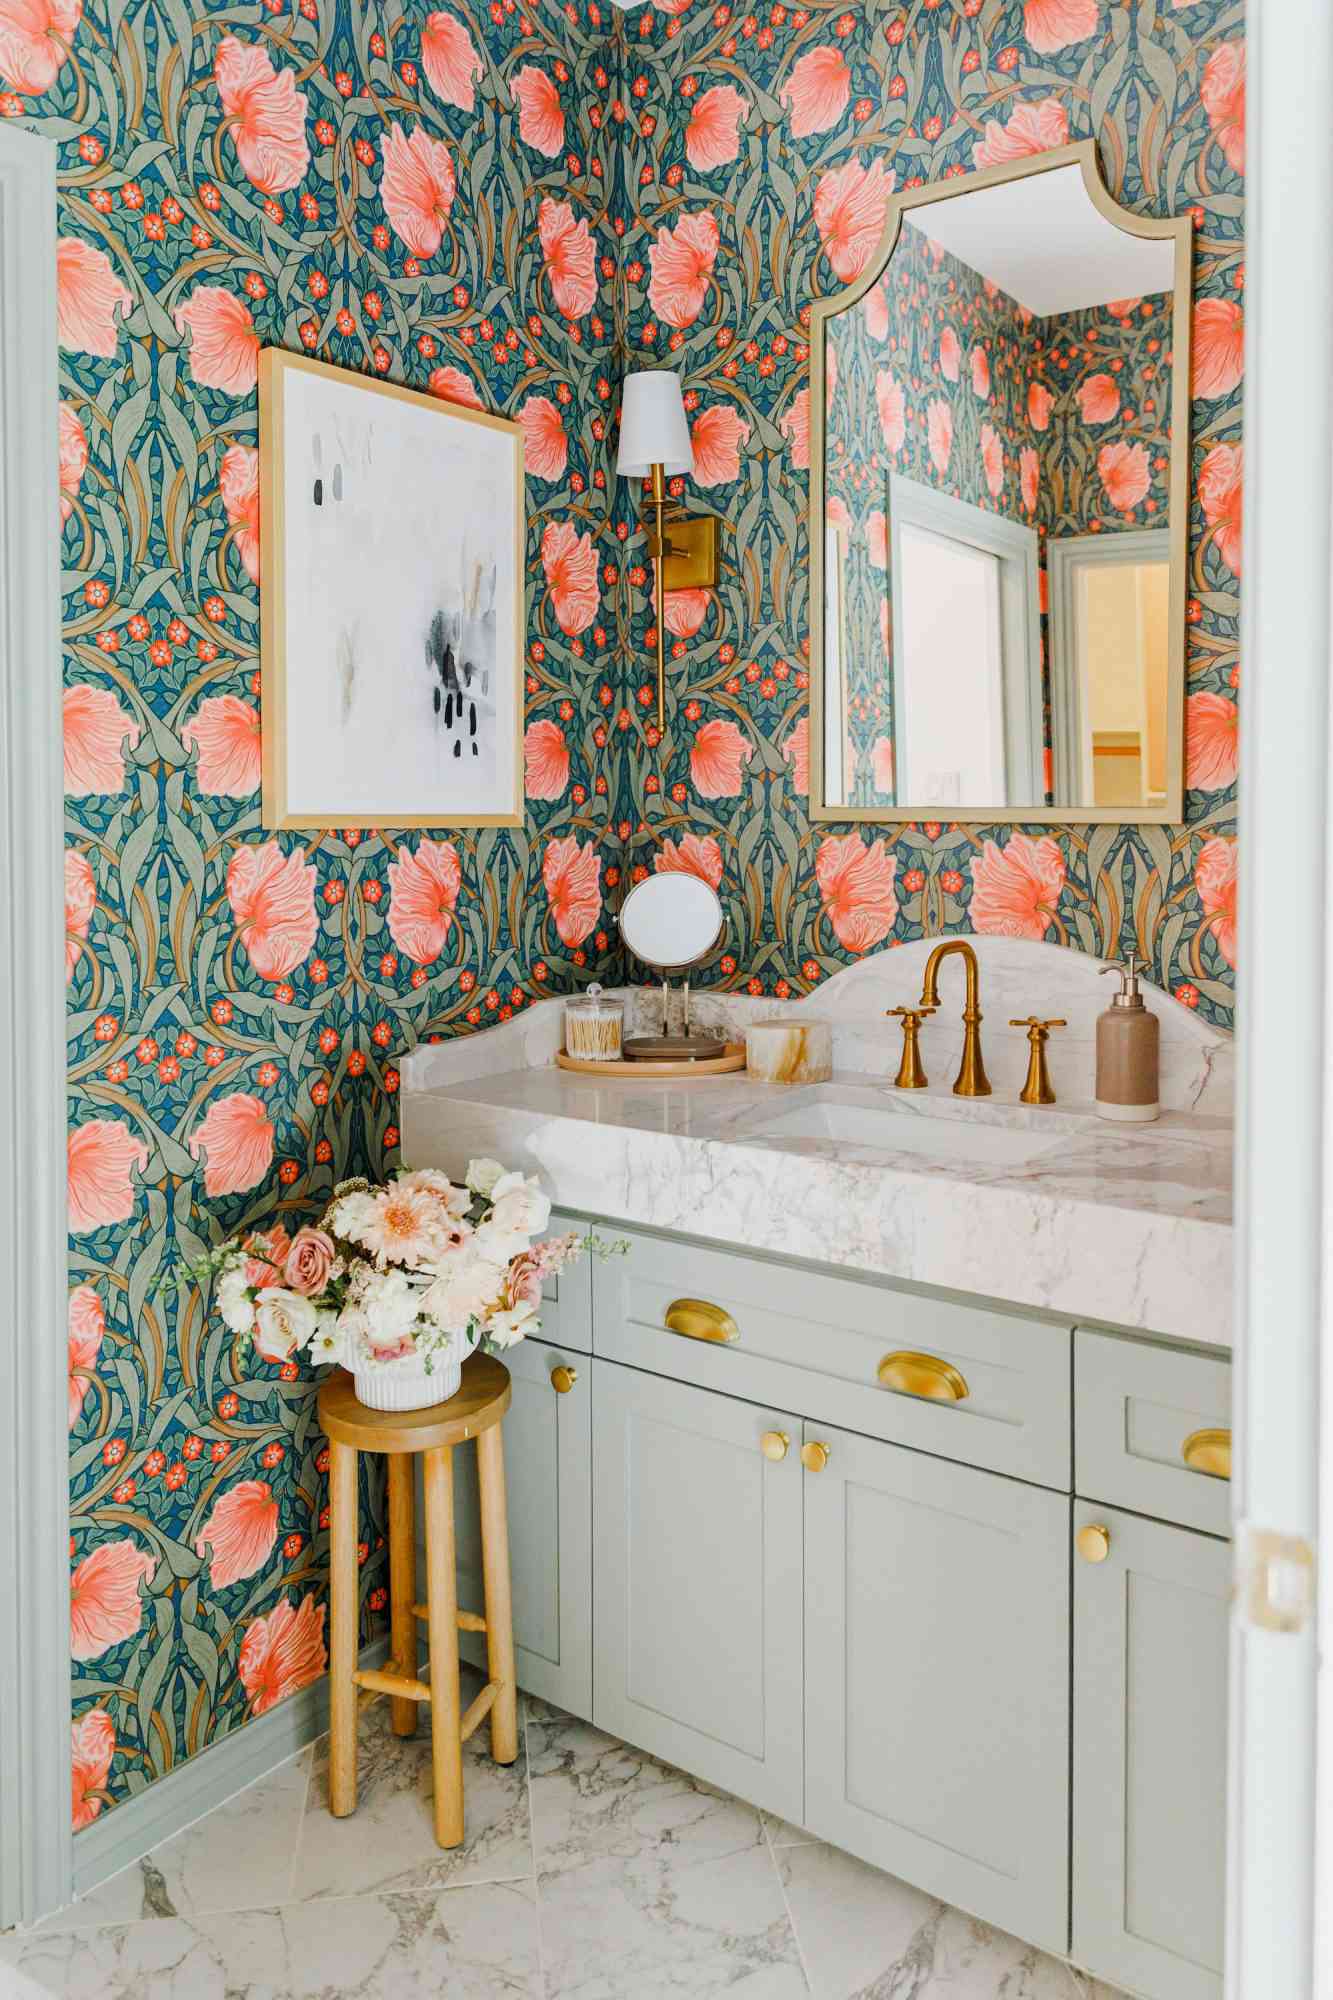 37 Bathroom Wallpaper Ideas That Add Pattern and Color to Your Space